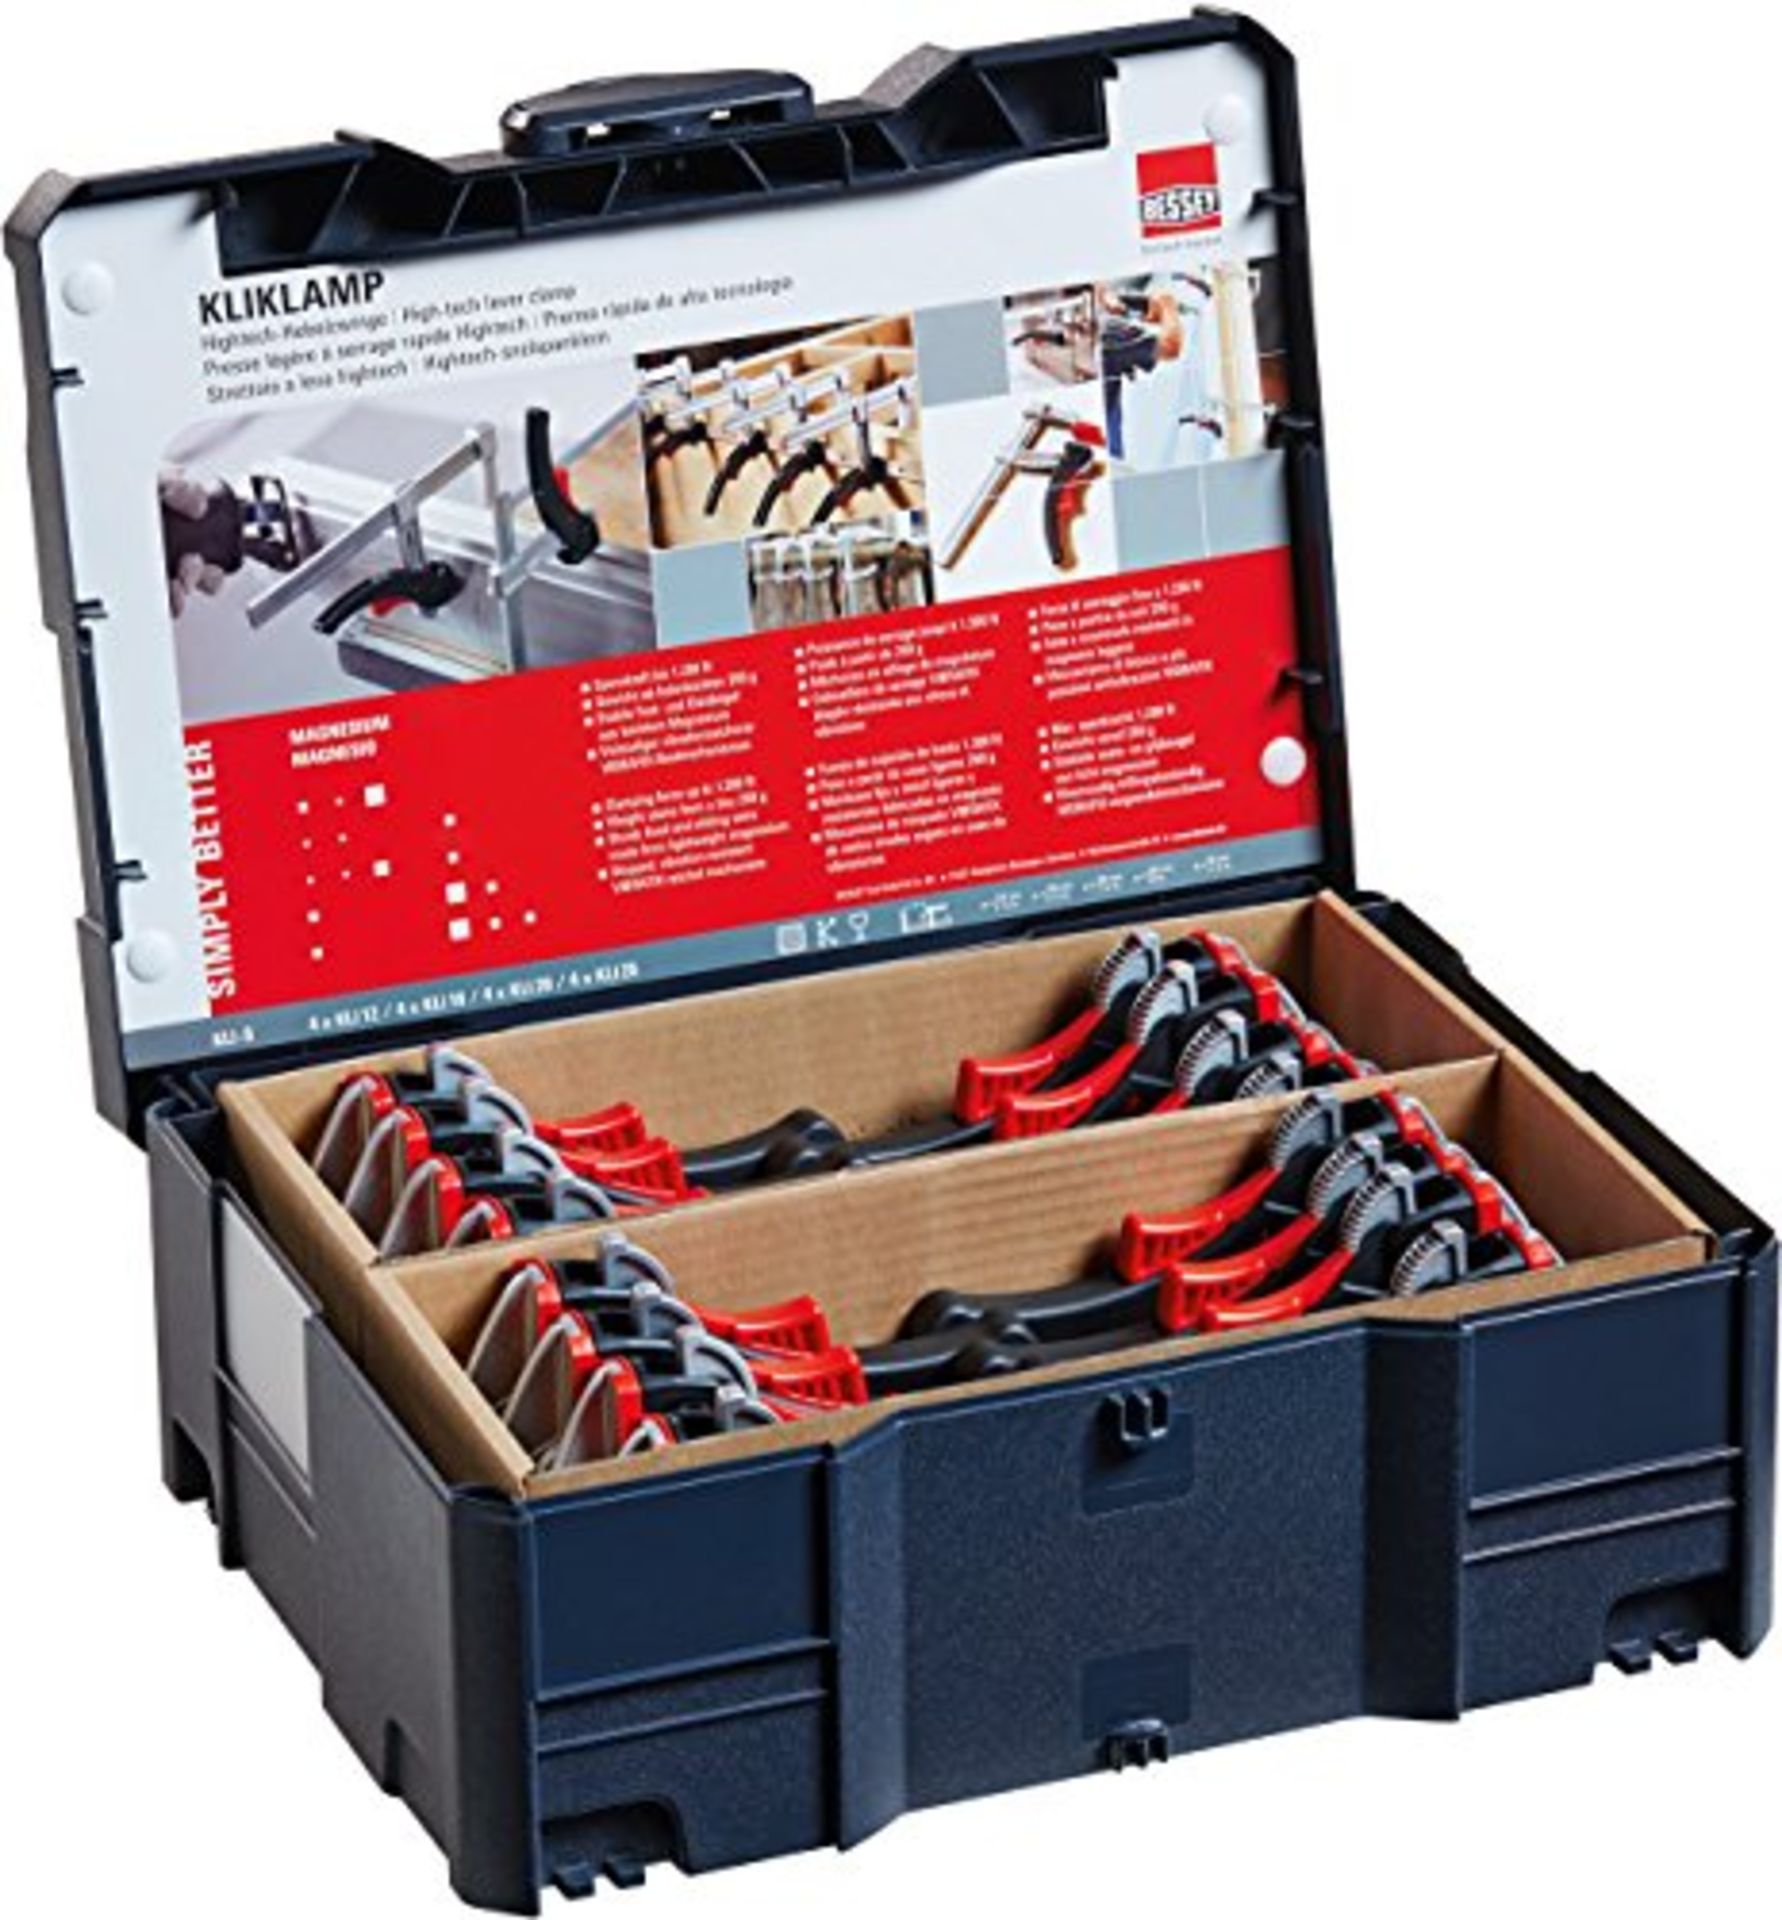 1 x Bessey KLI-S Kliklamp Systainer Set with 14 Clamps, Silver, teilig | EAN: 4008158027296 | RRP £2